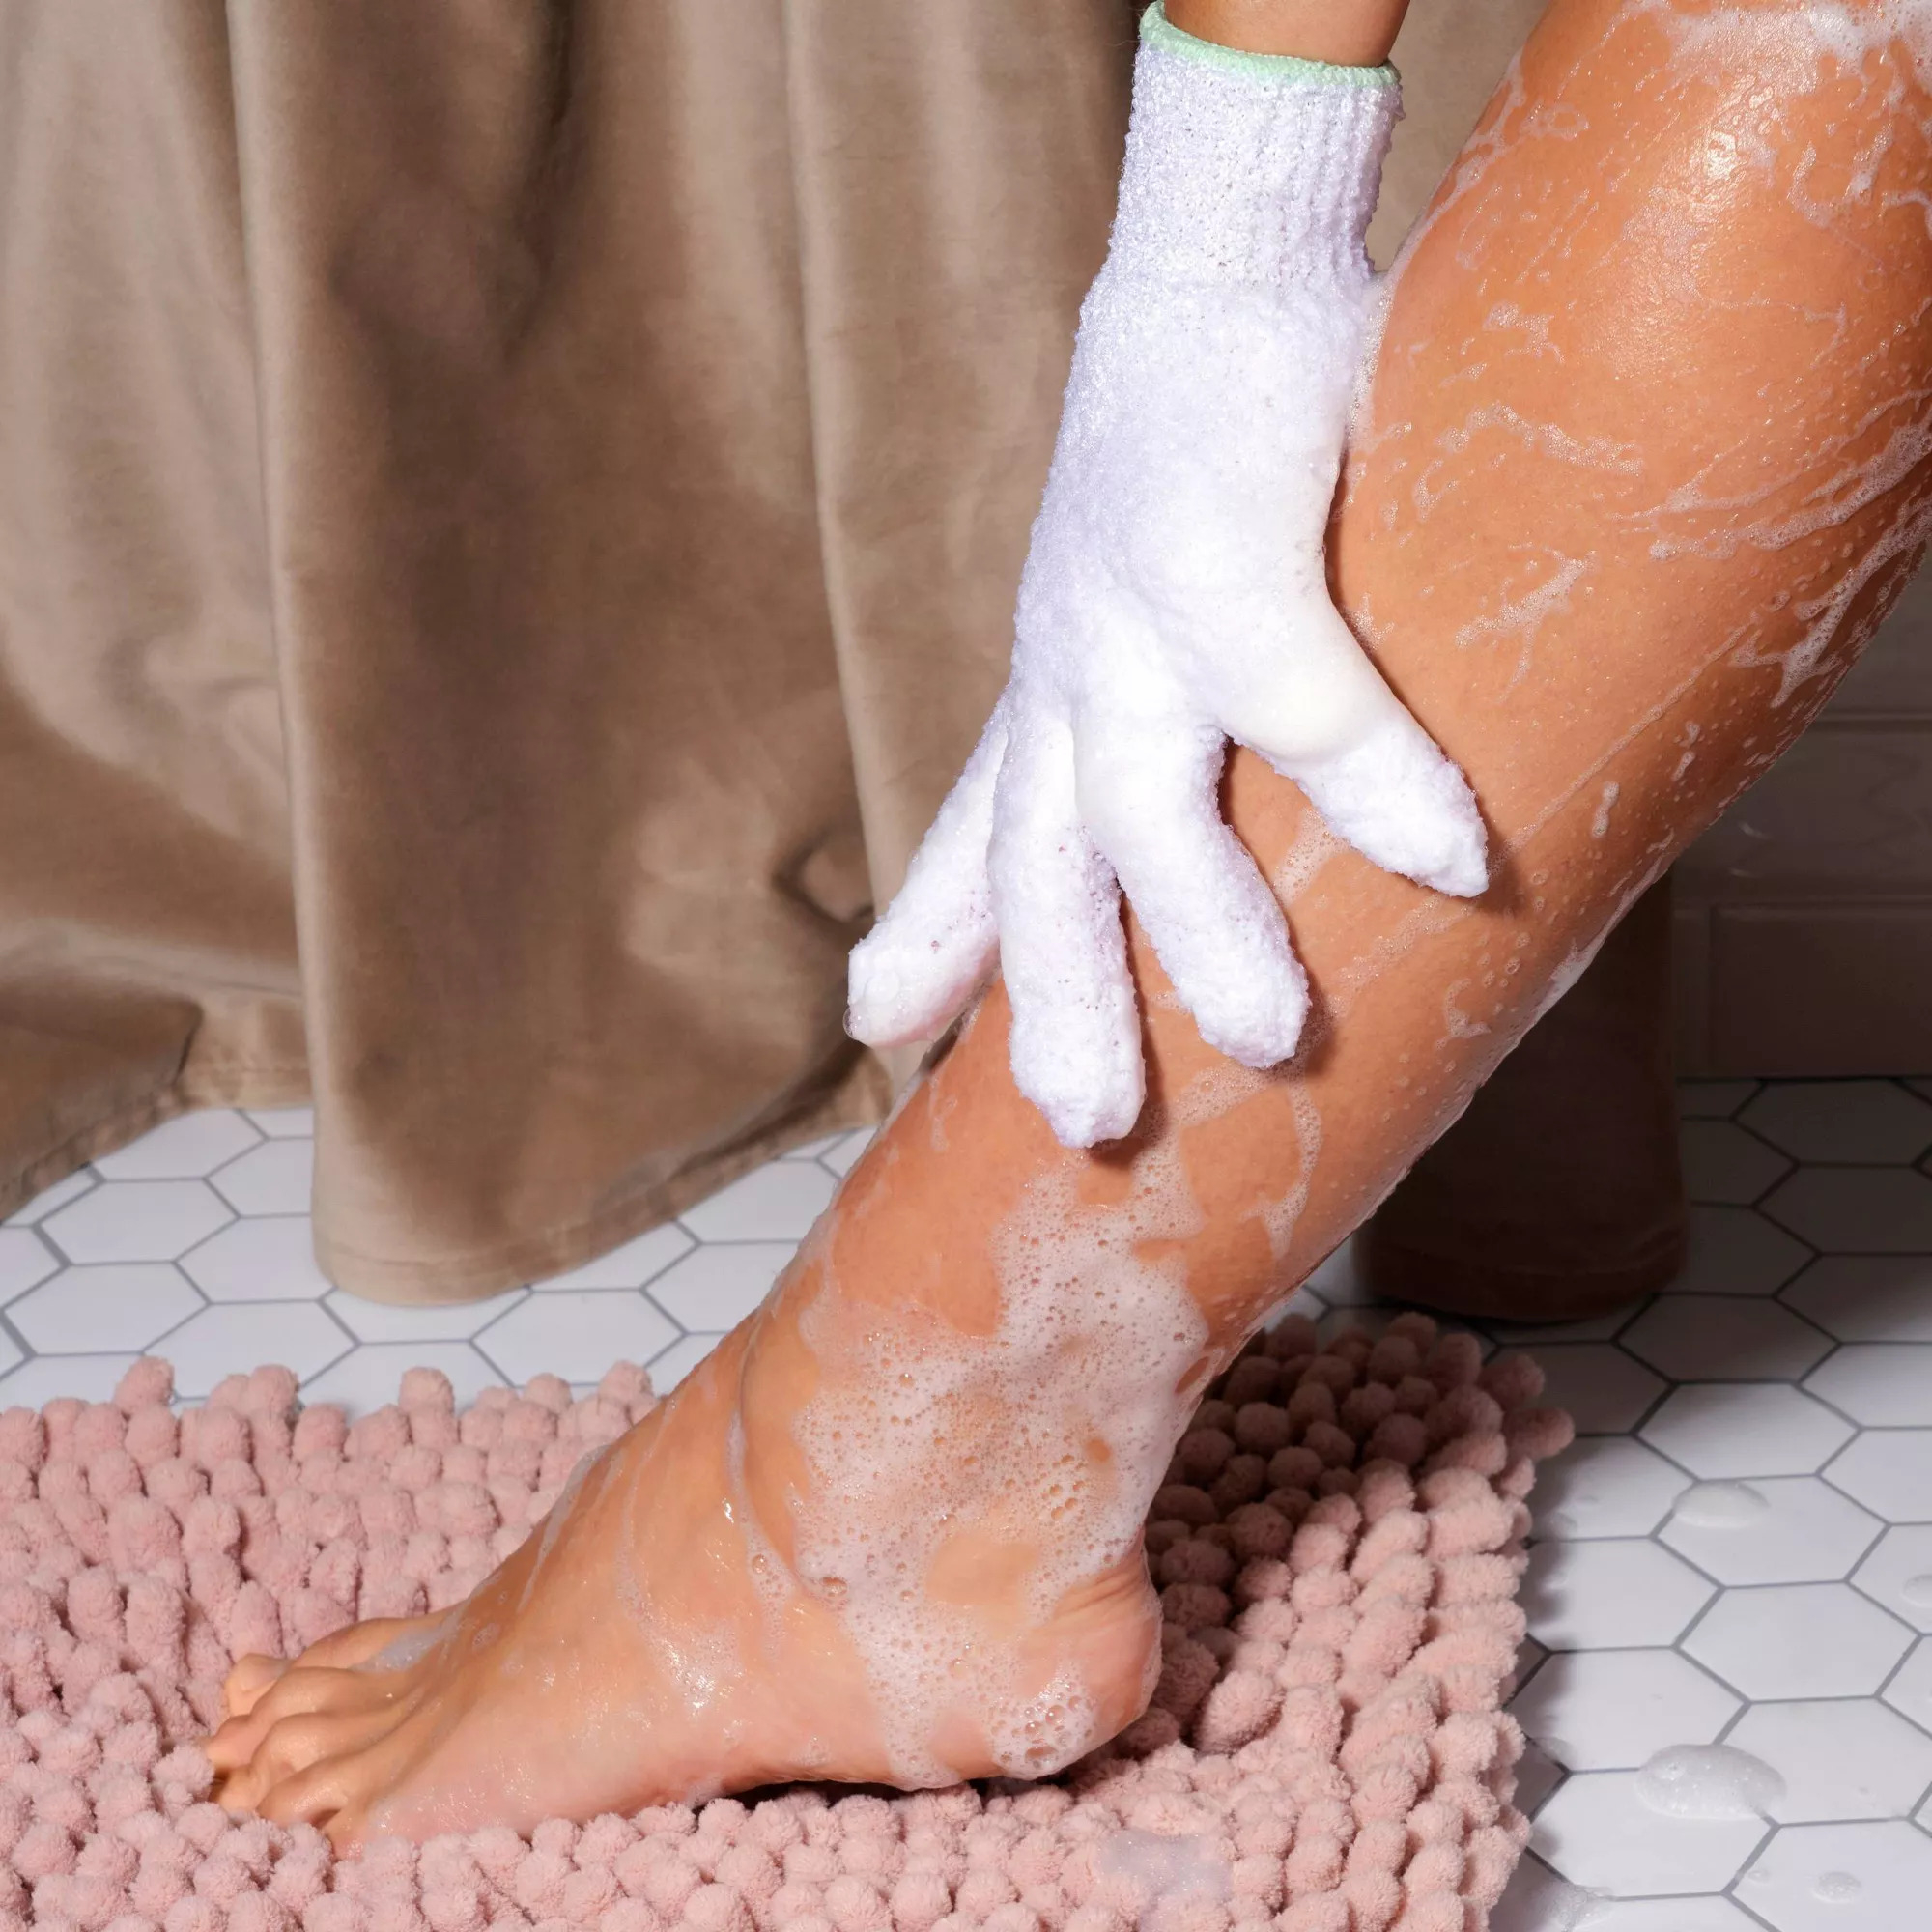 A model wearing the glove and scrubbing their leg